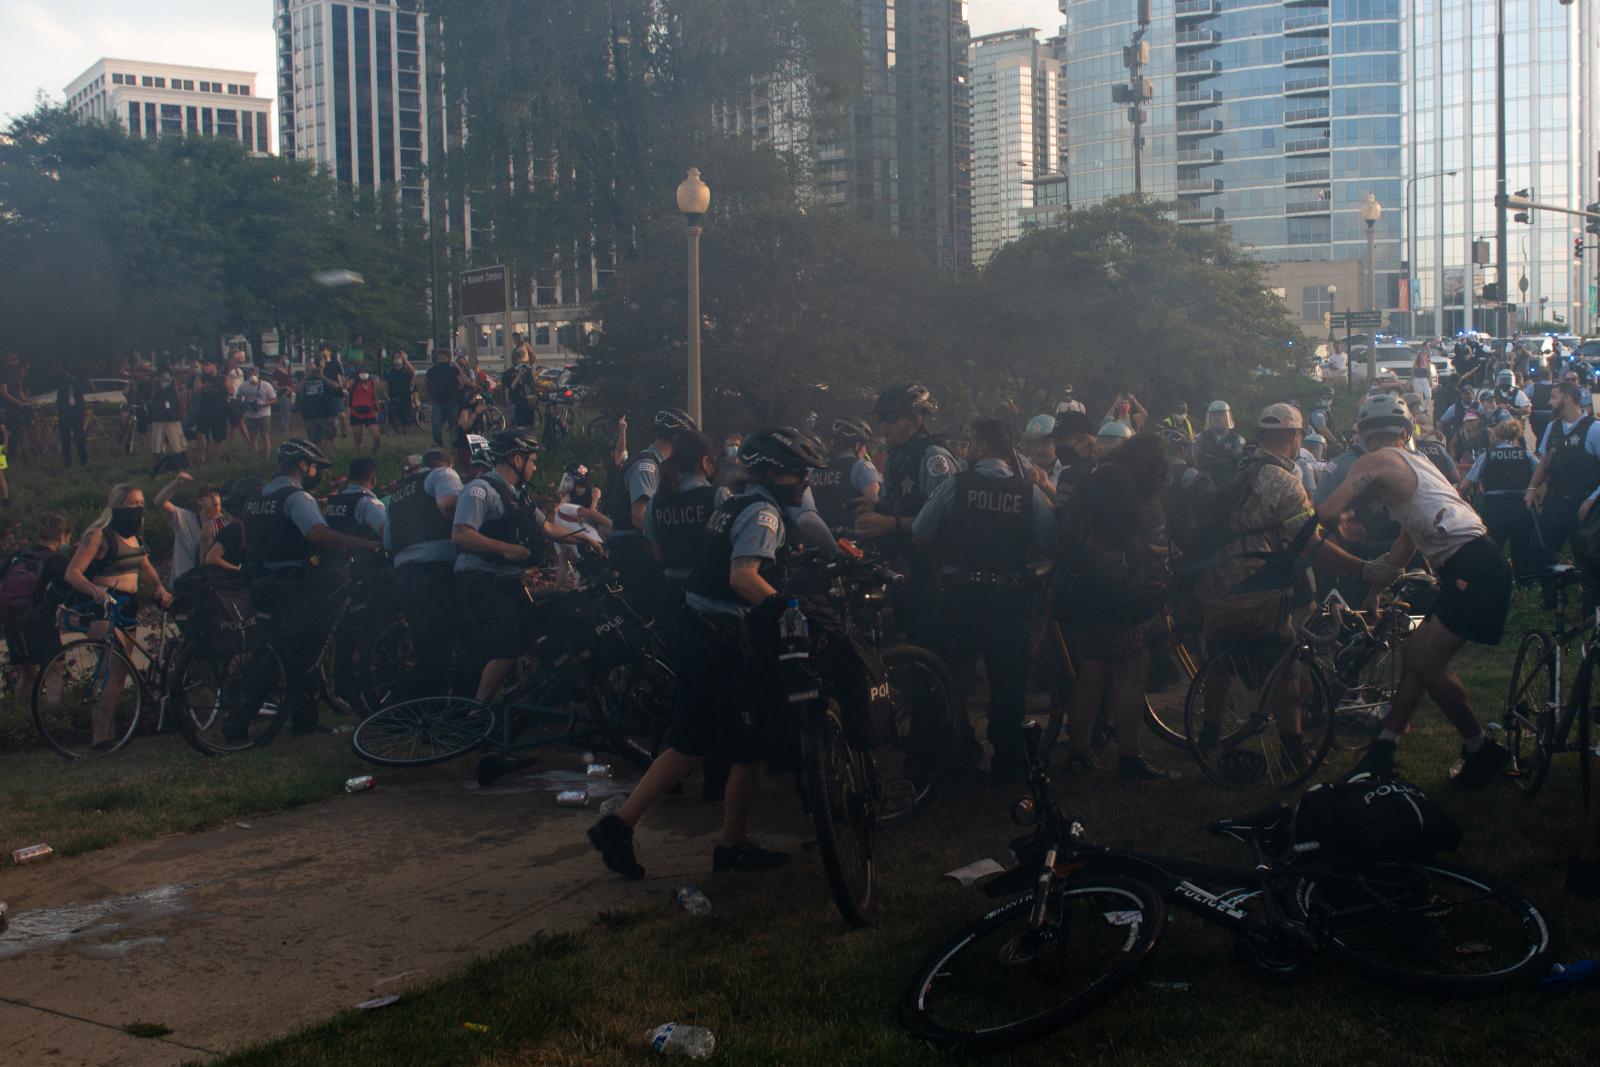 The Storming of the Columbus Statue  - A line of Police push bikes in a retreat against protestors.